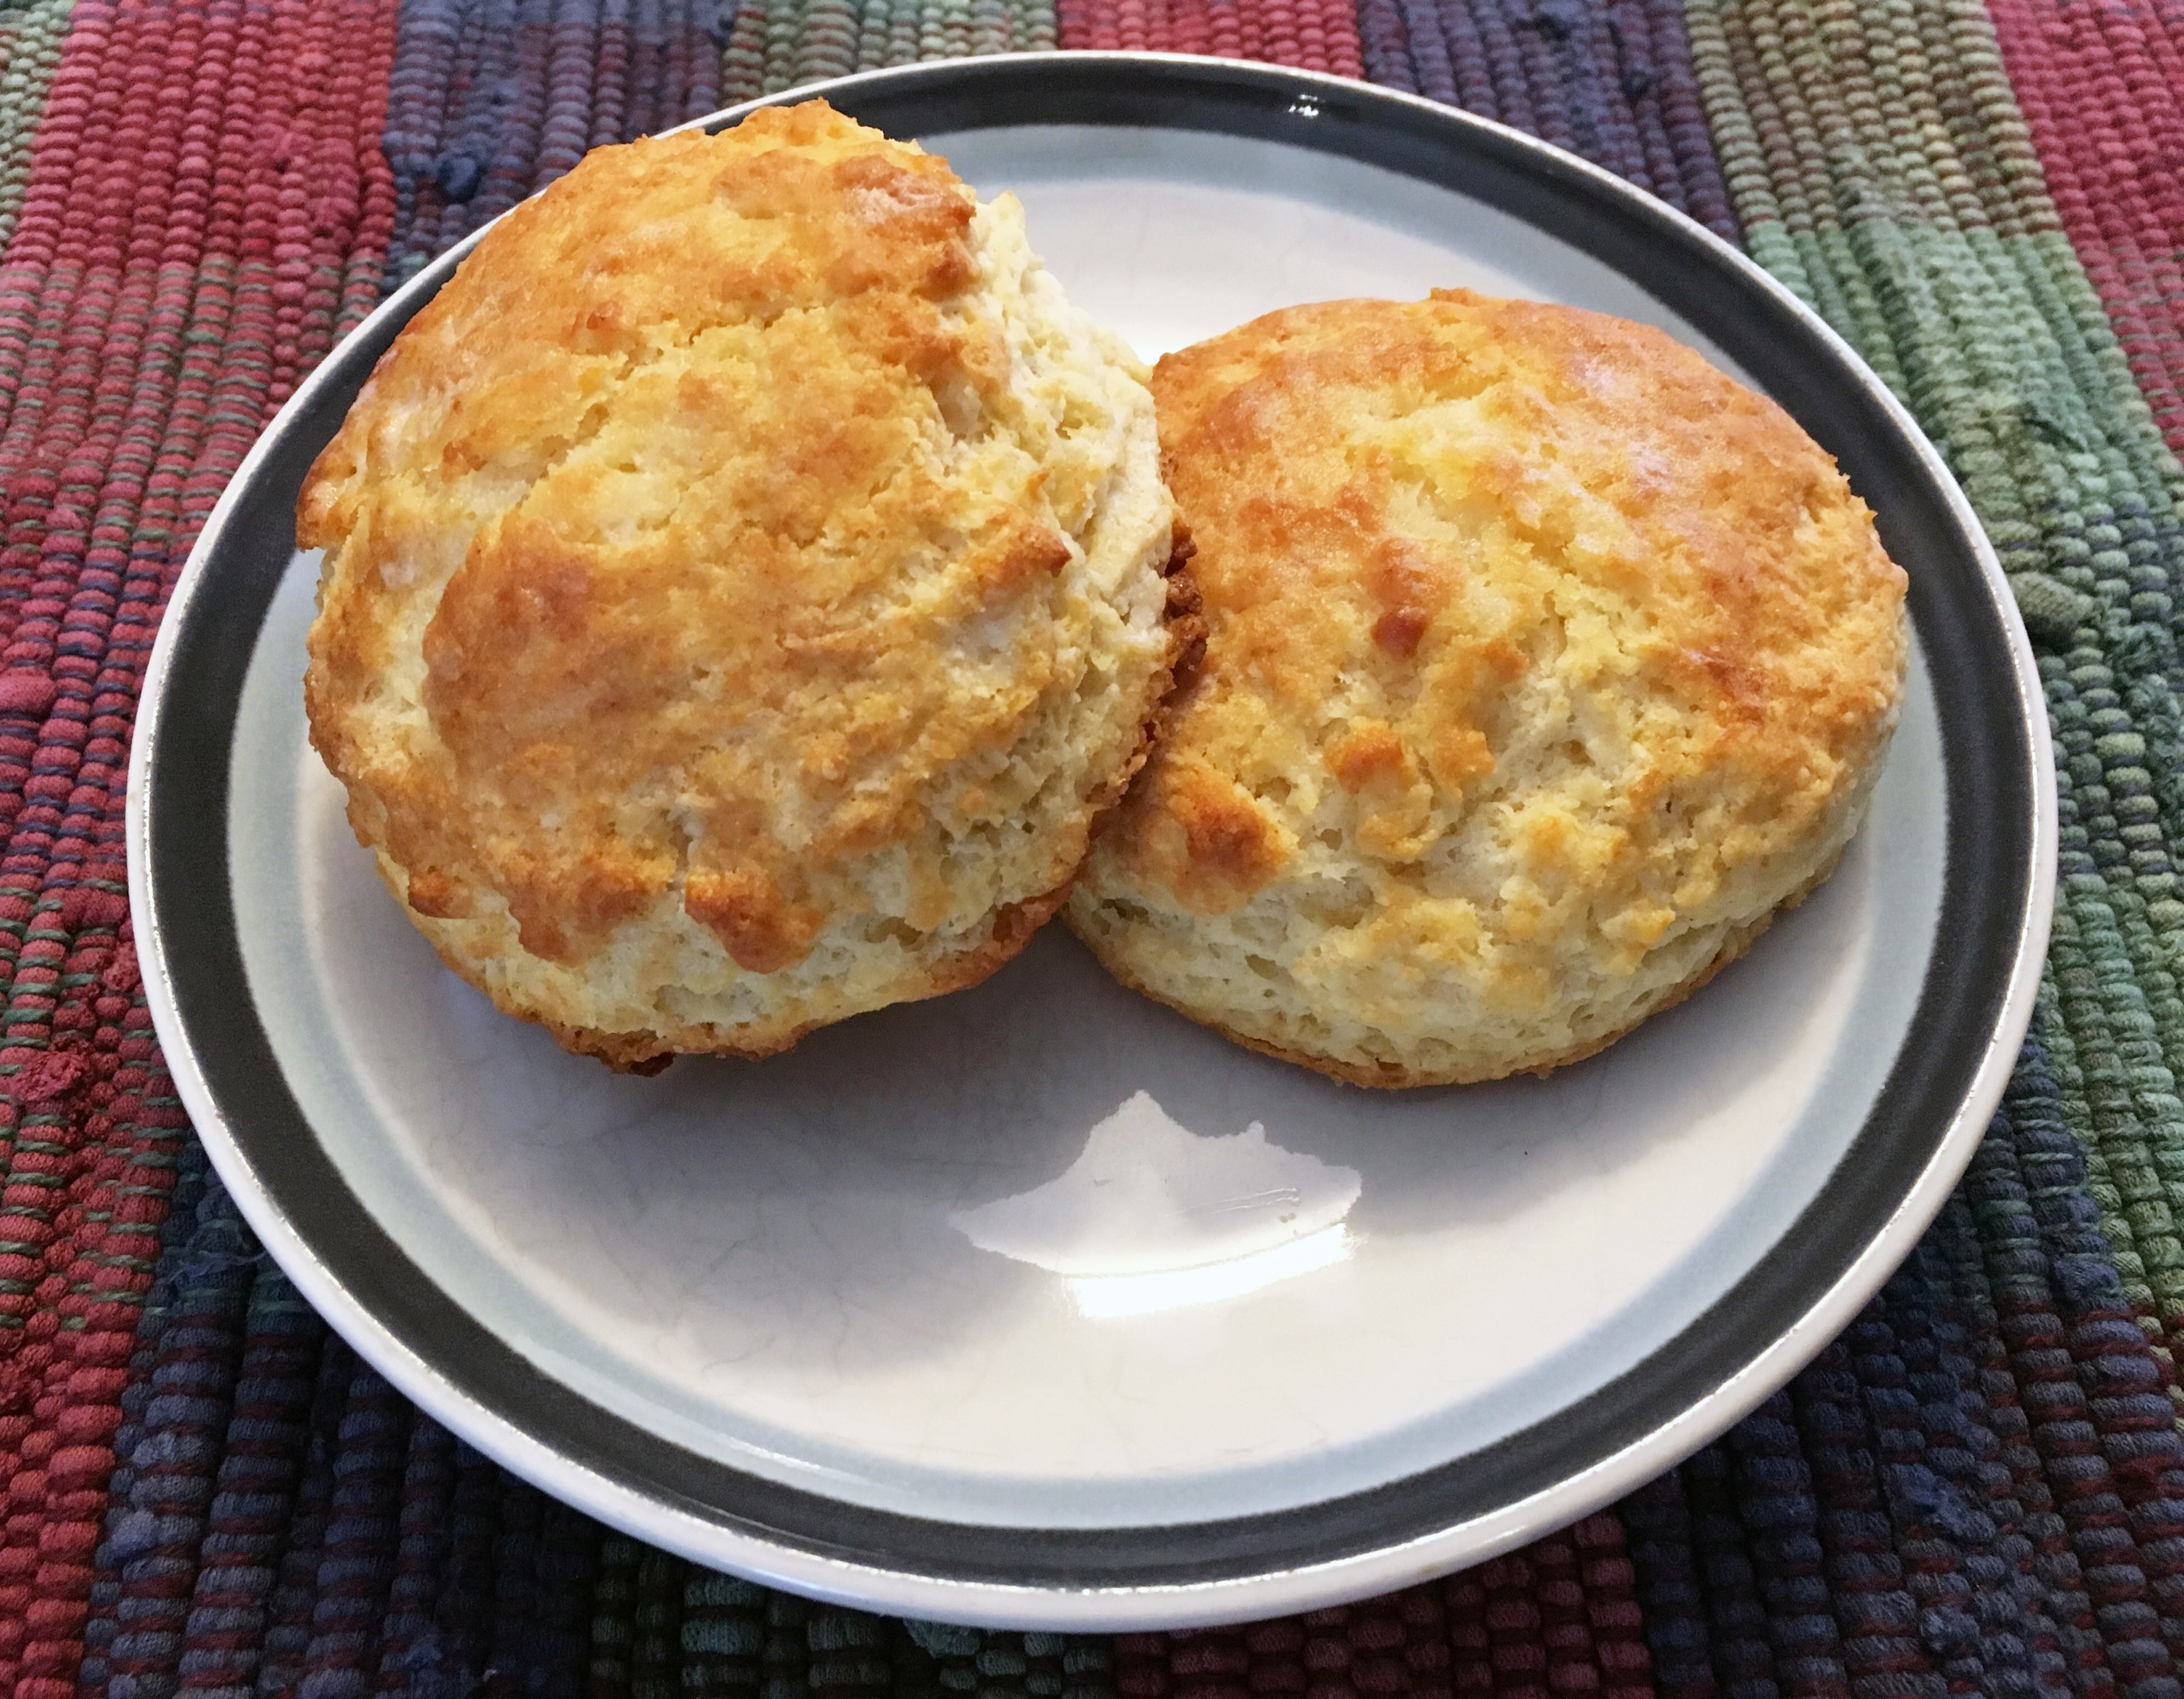 Try baking or cooking something new, such as homemade biscuits, this winter. (NDSU photo)